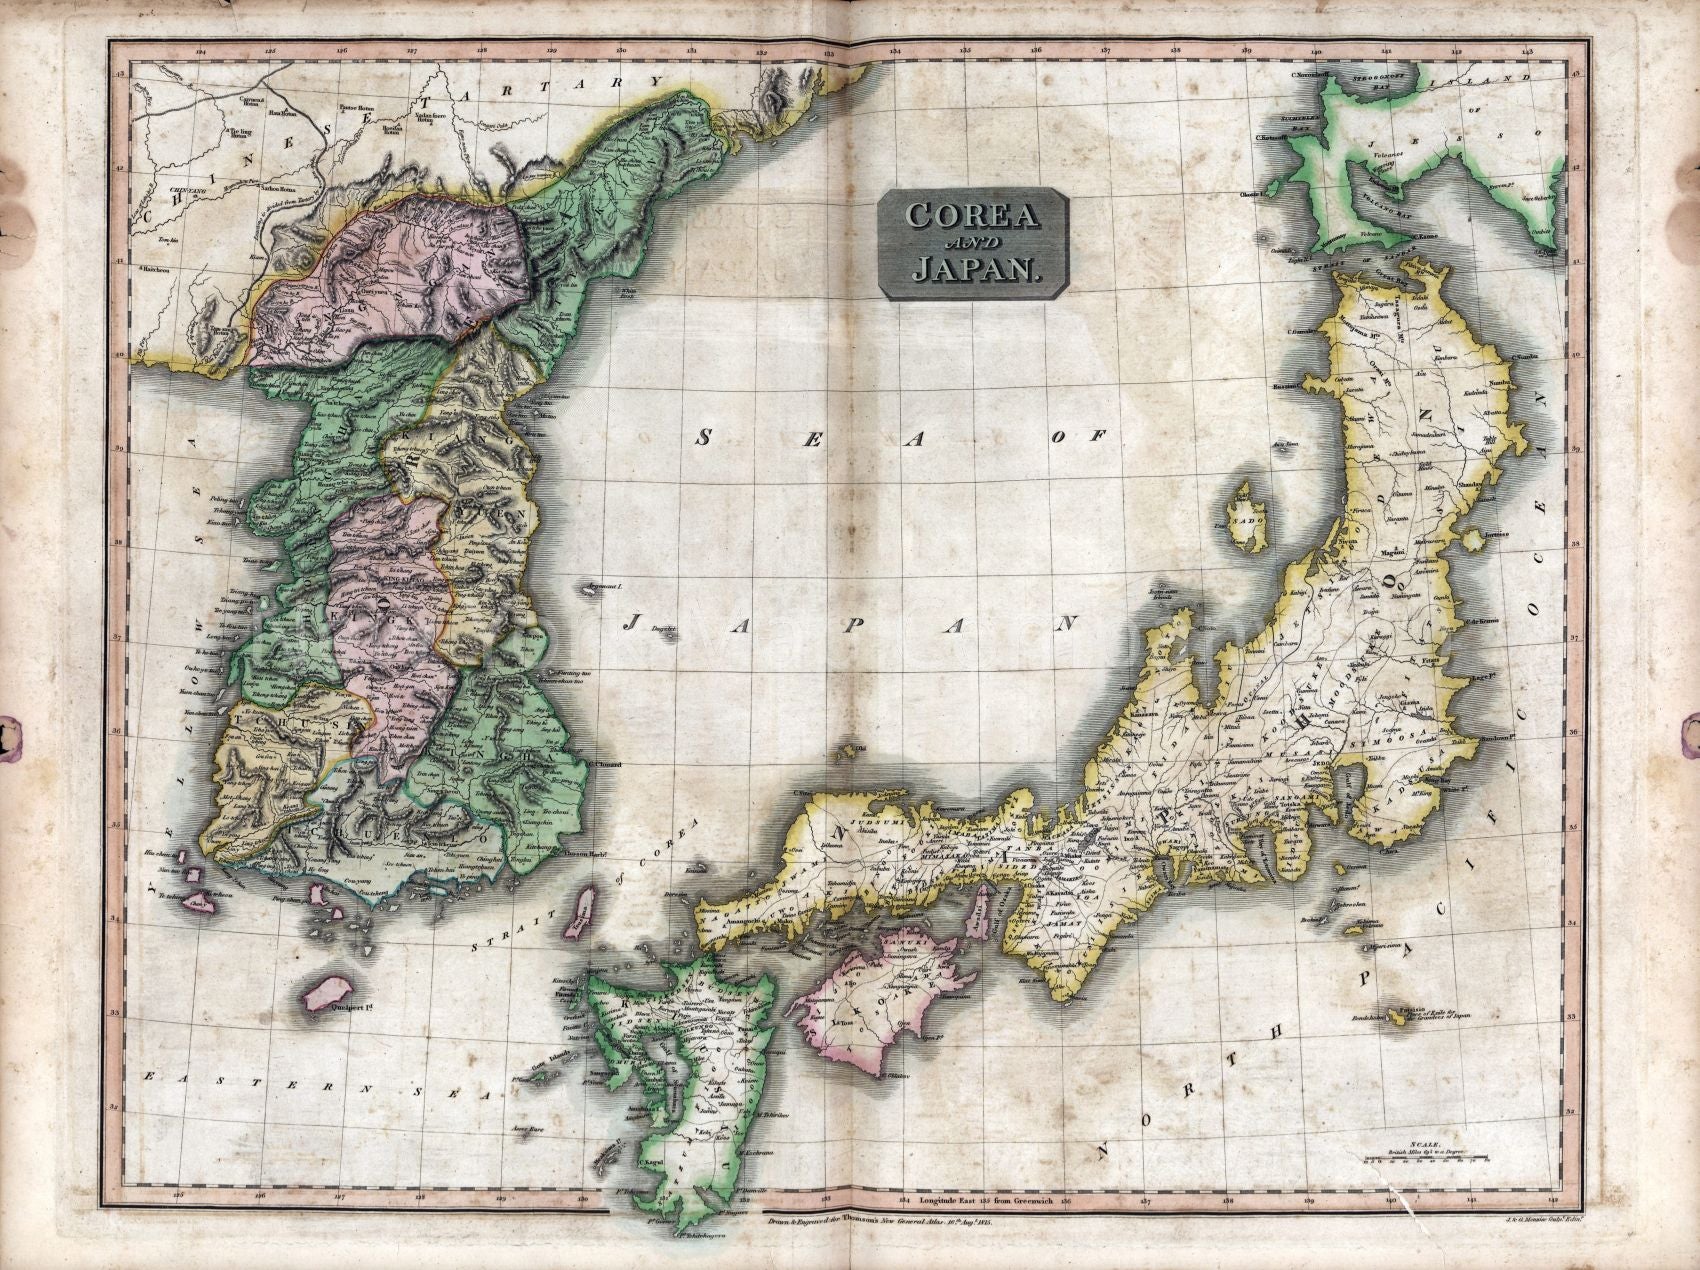 1815 map Corea sic and Japan Drawn and engraved for Thomson's New General Atlas, 16th. Aug.t 1815. Map Subjects: Japan | Korea